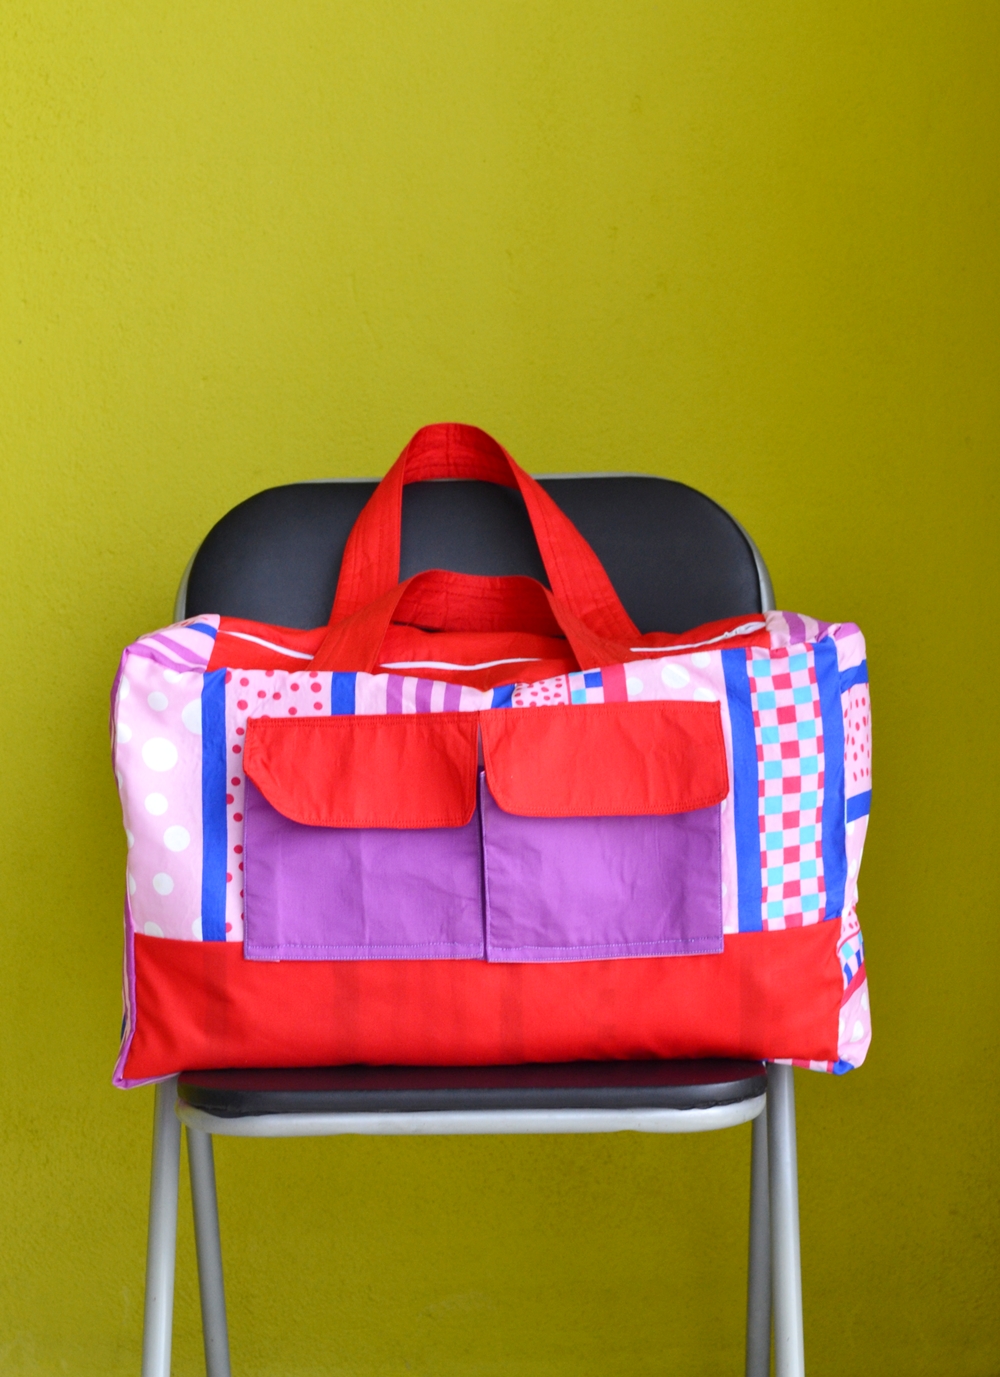 Duffle Bag from Pillow Cover (Free Sewing Pattern)